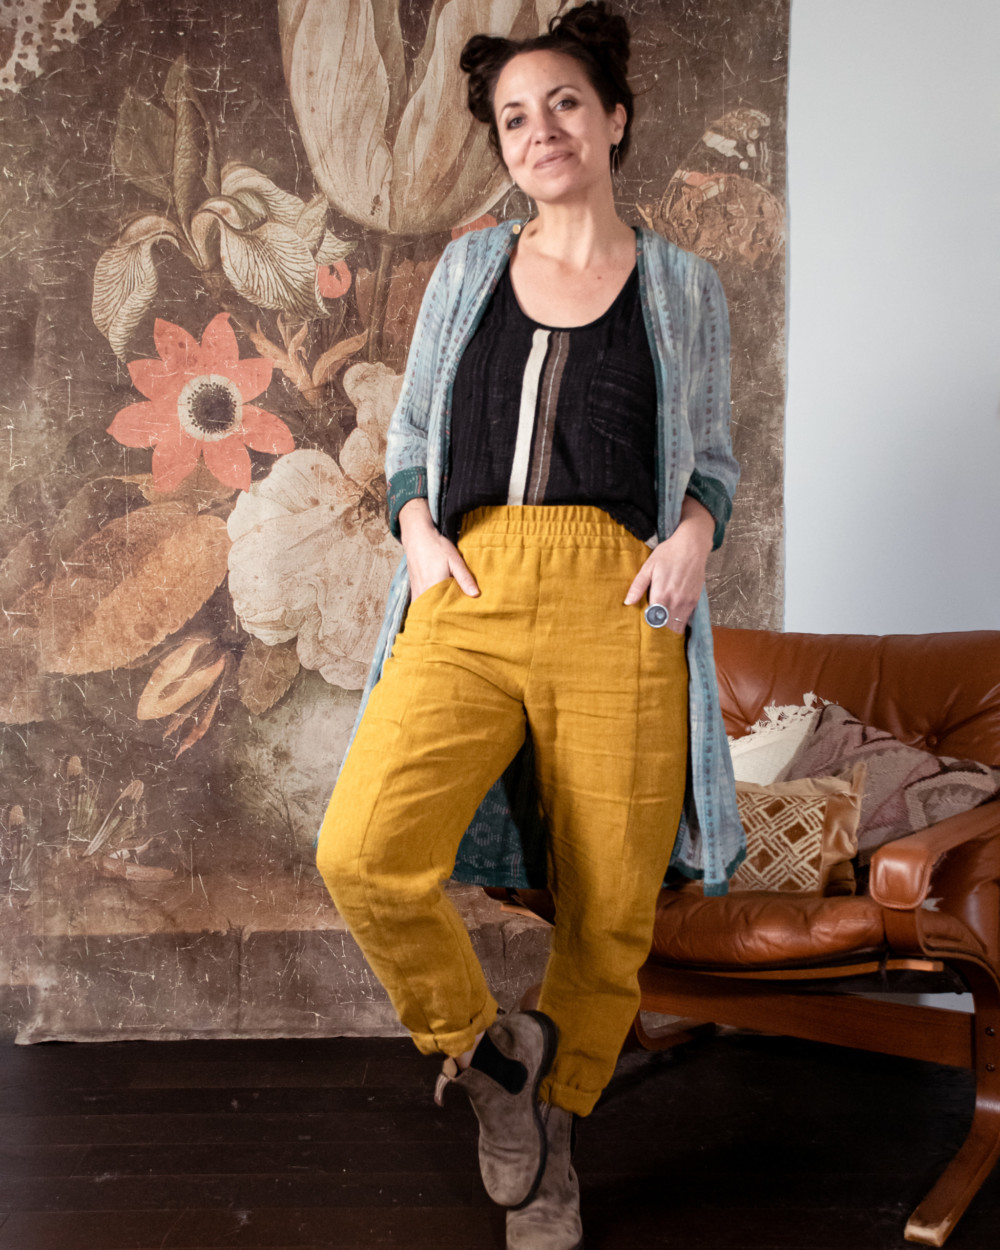 Indie patterns: elastic waist pants comparisons and how to choose - Time to  Sew